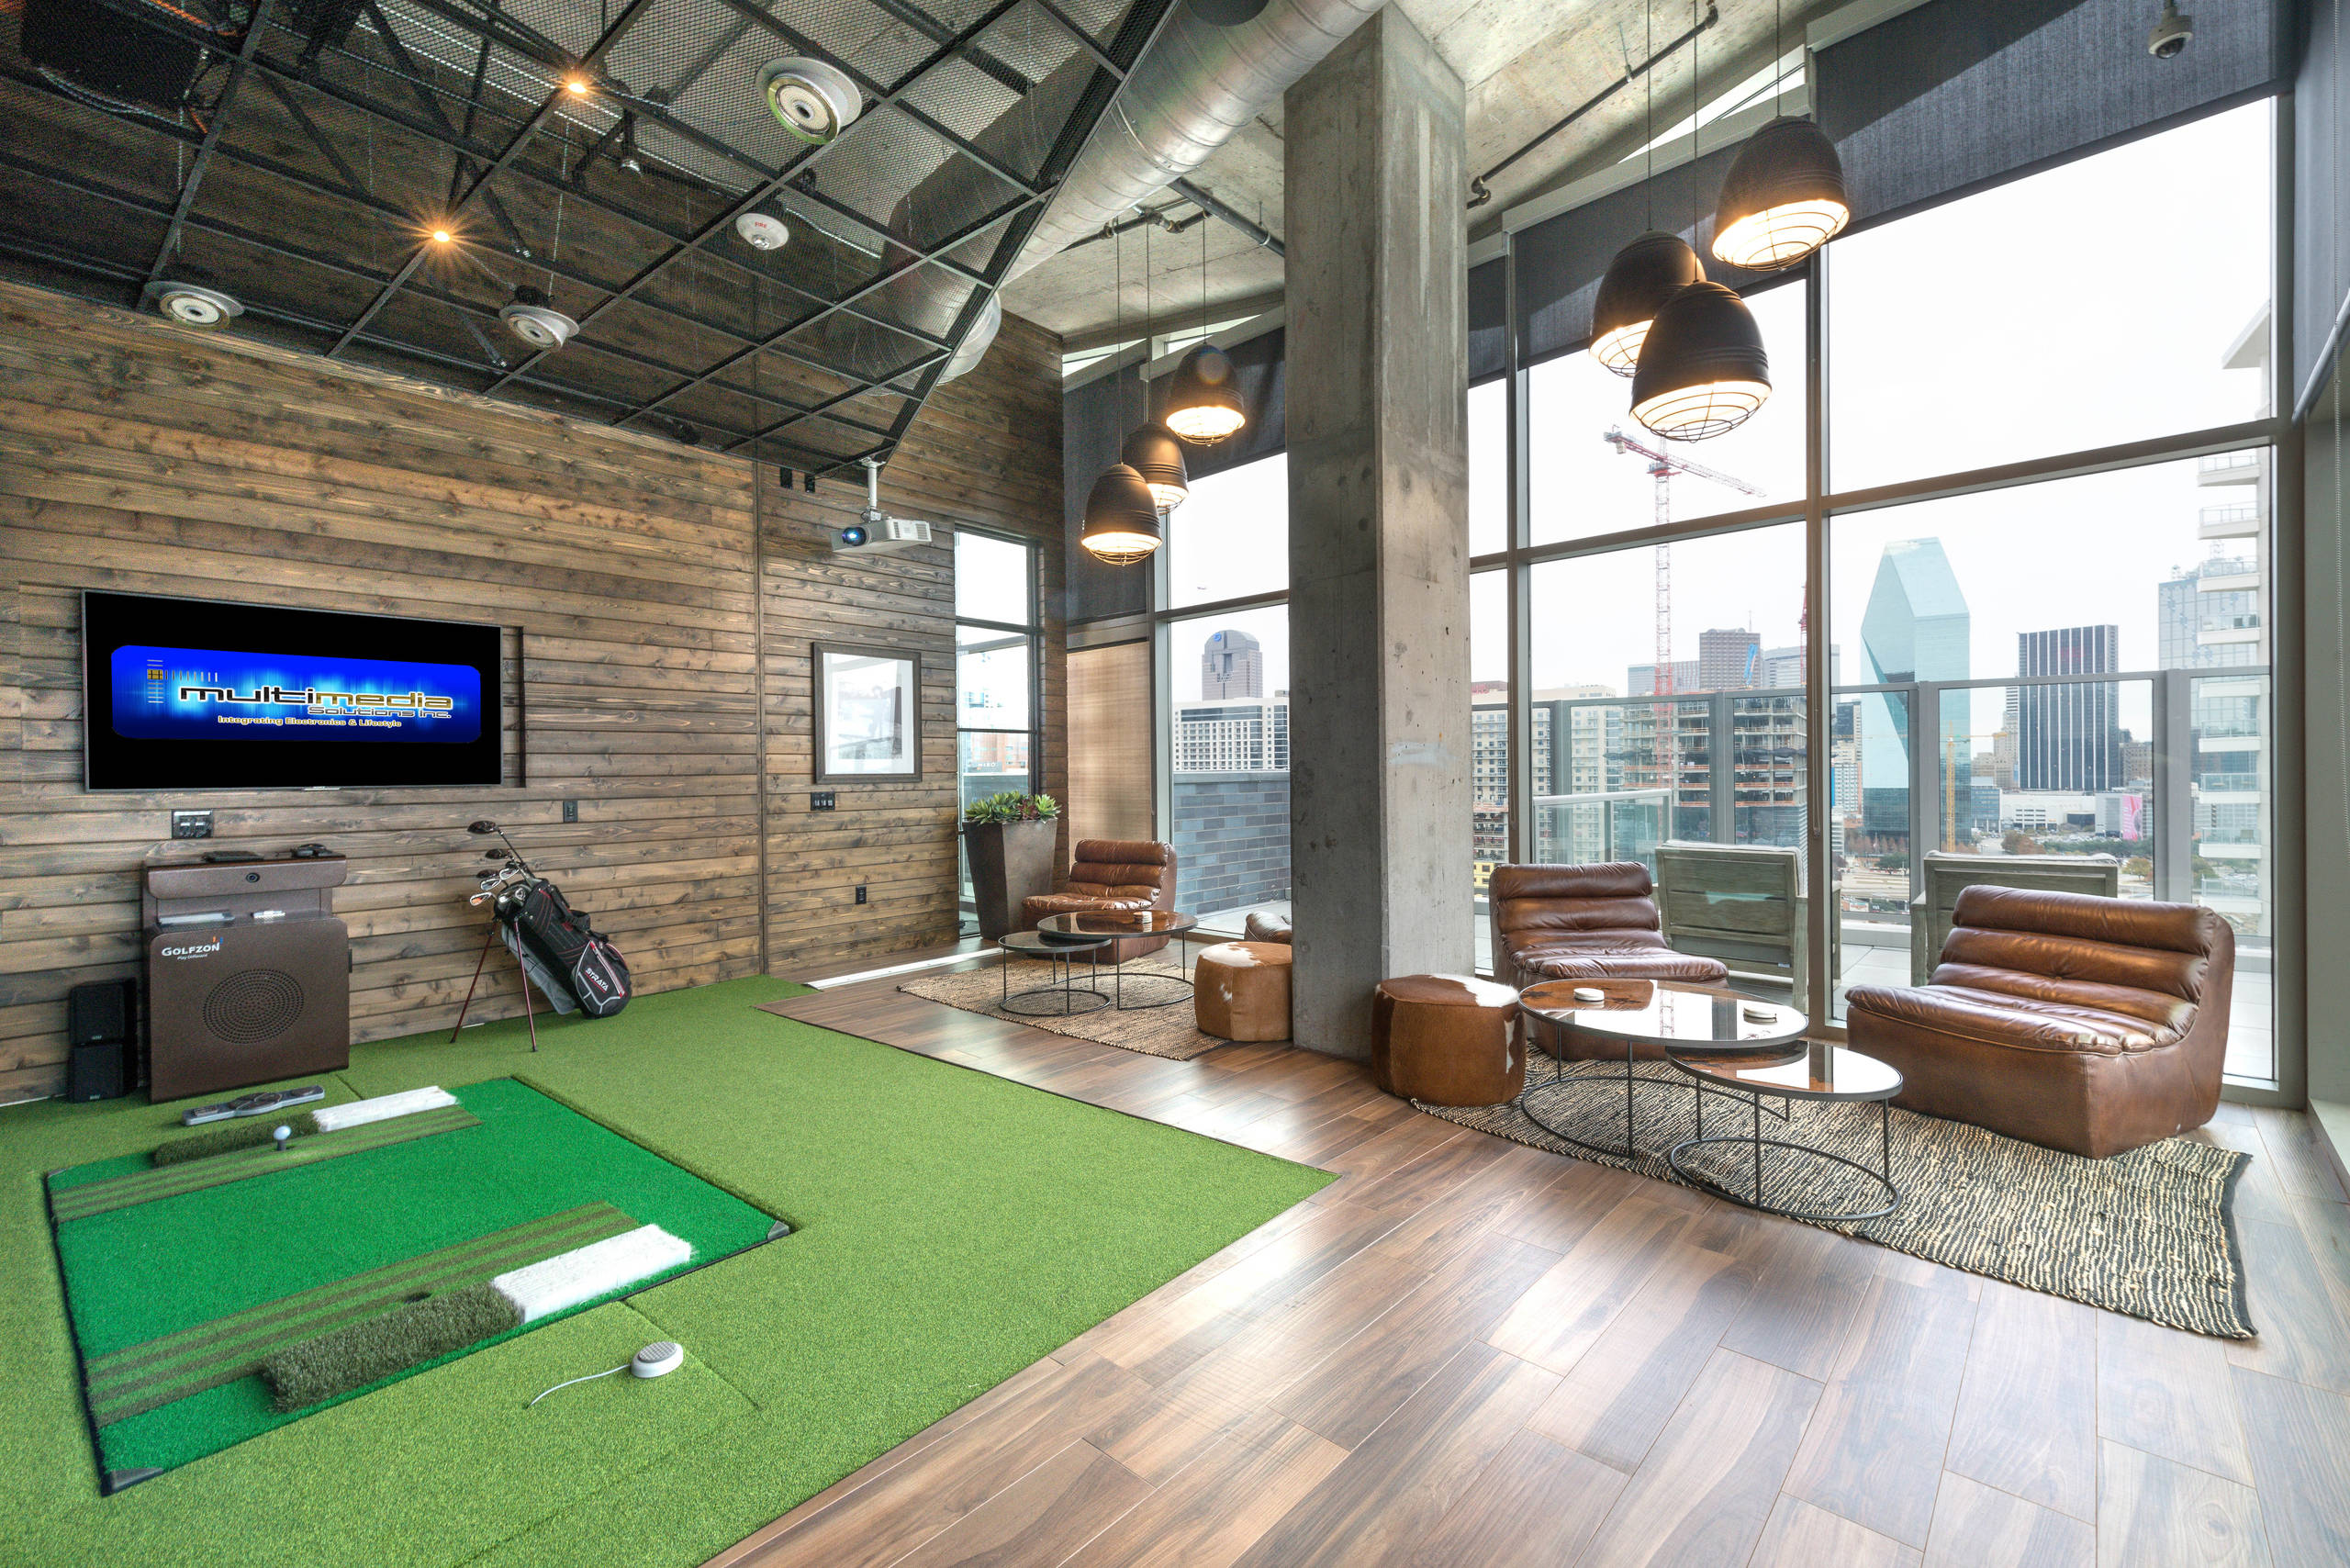 75 Industrial Game Room Ideas You'll Love - August, 2023 | Houzz